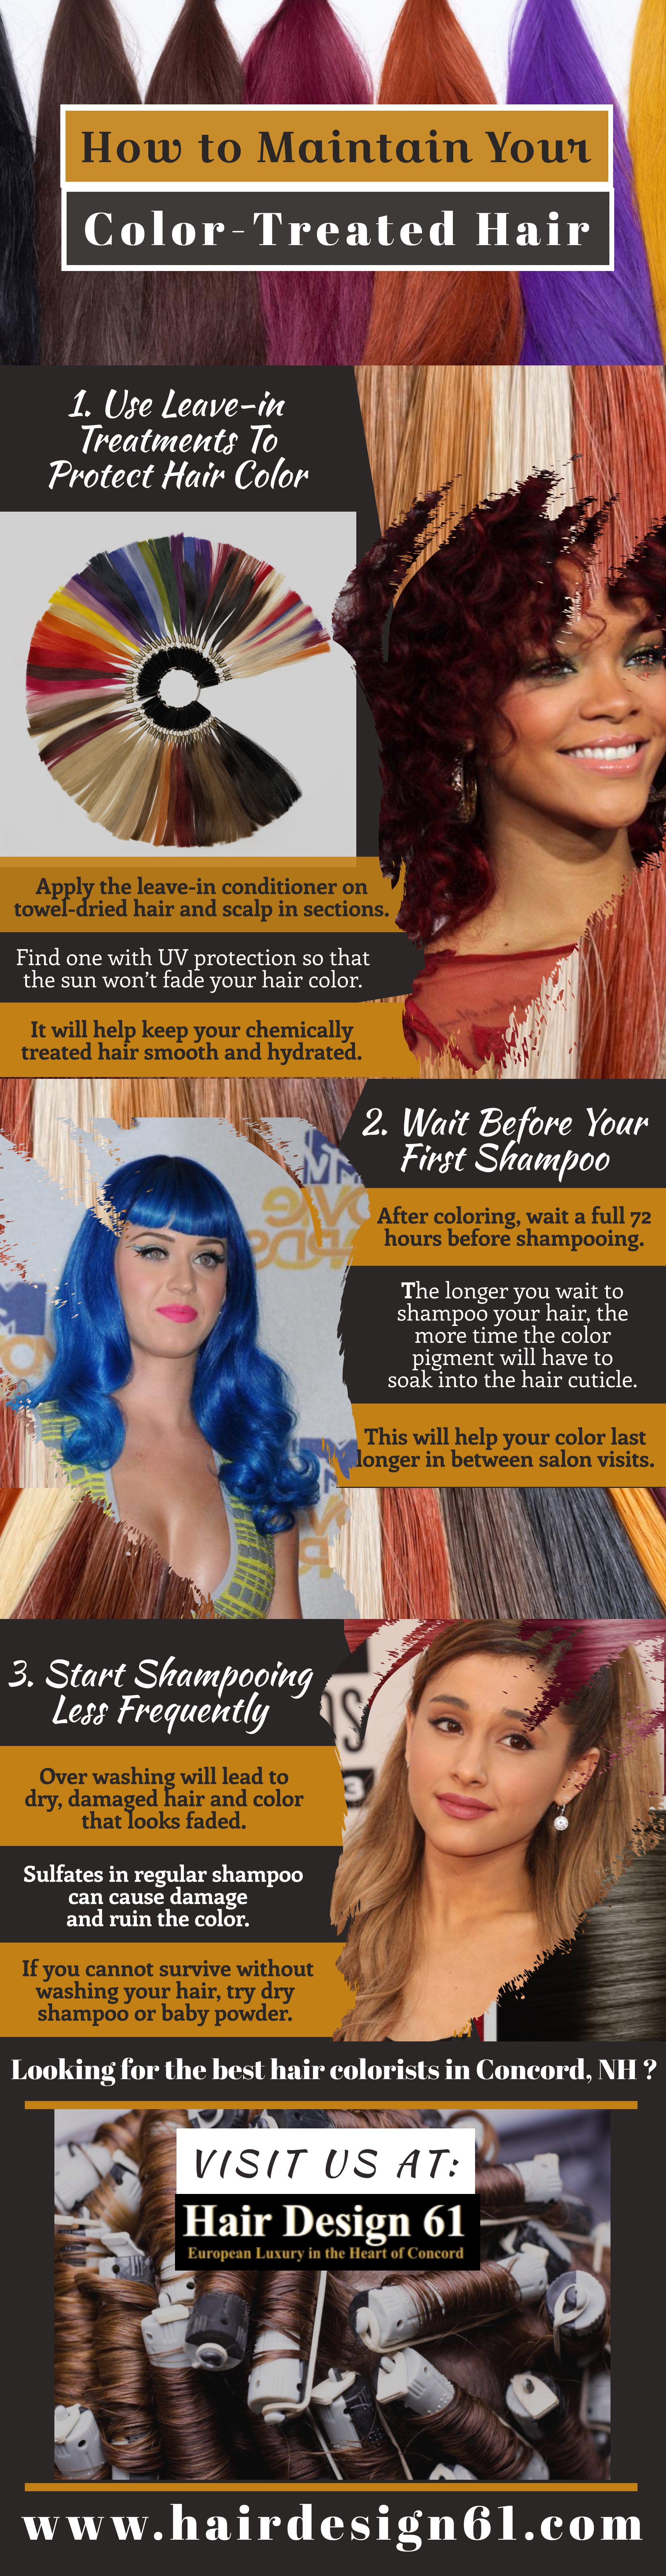 Image showing Hair Coloring Salon in Concord NH